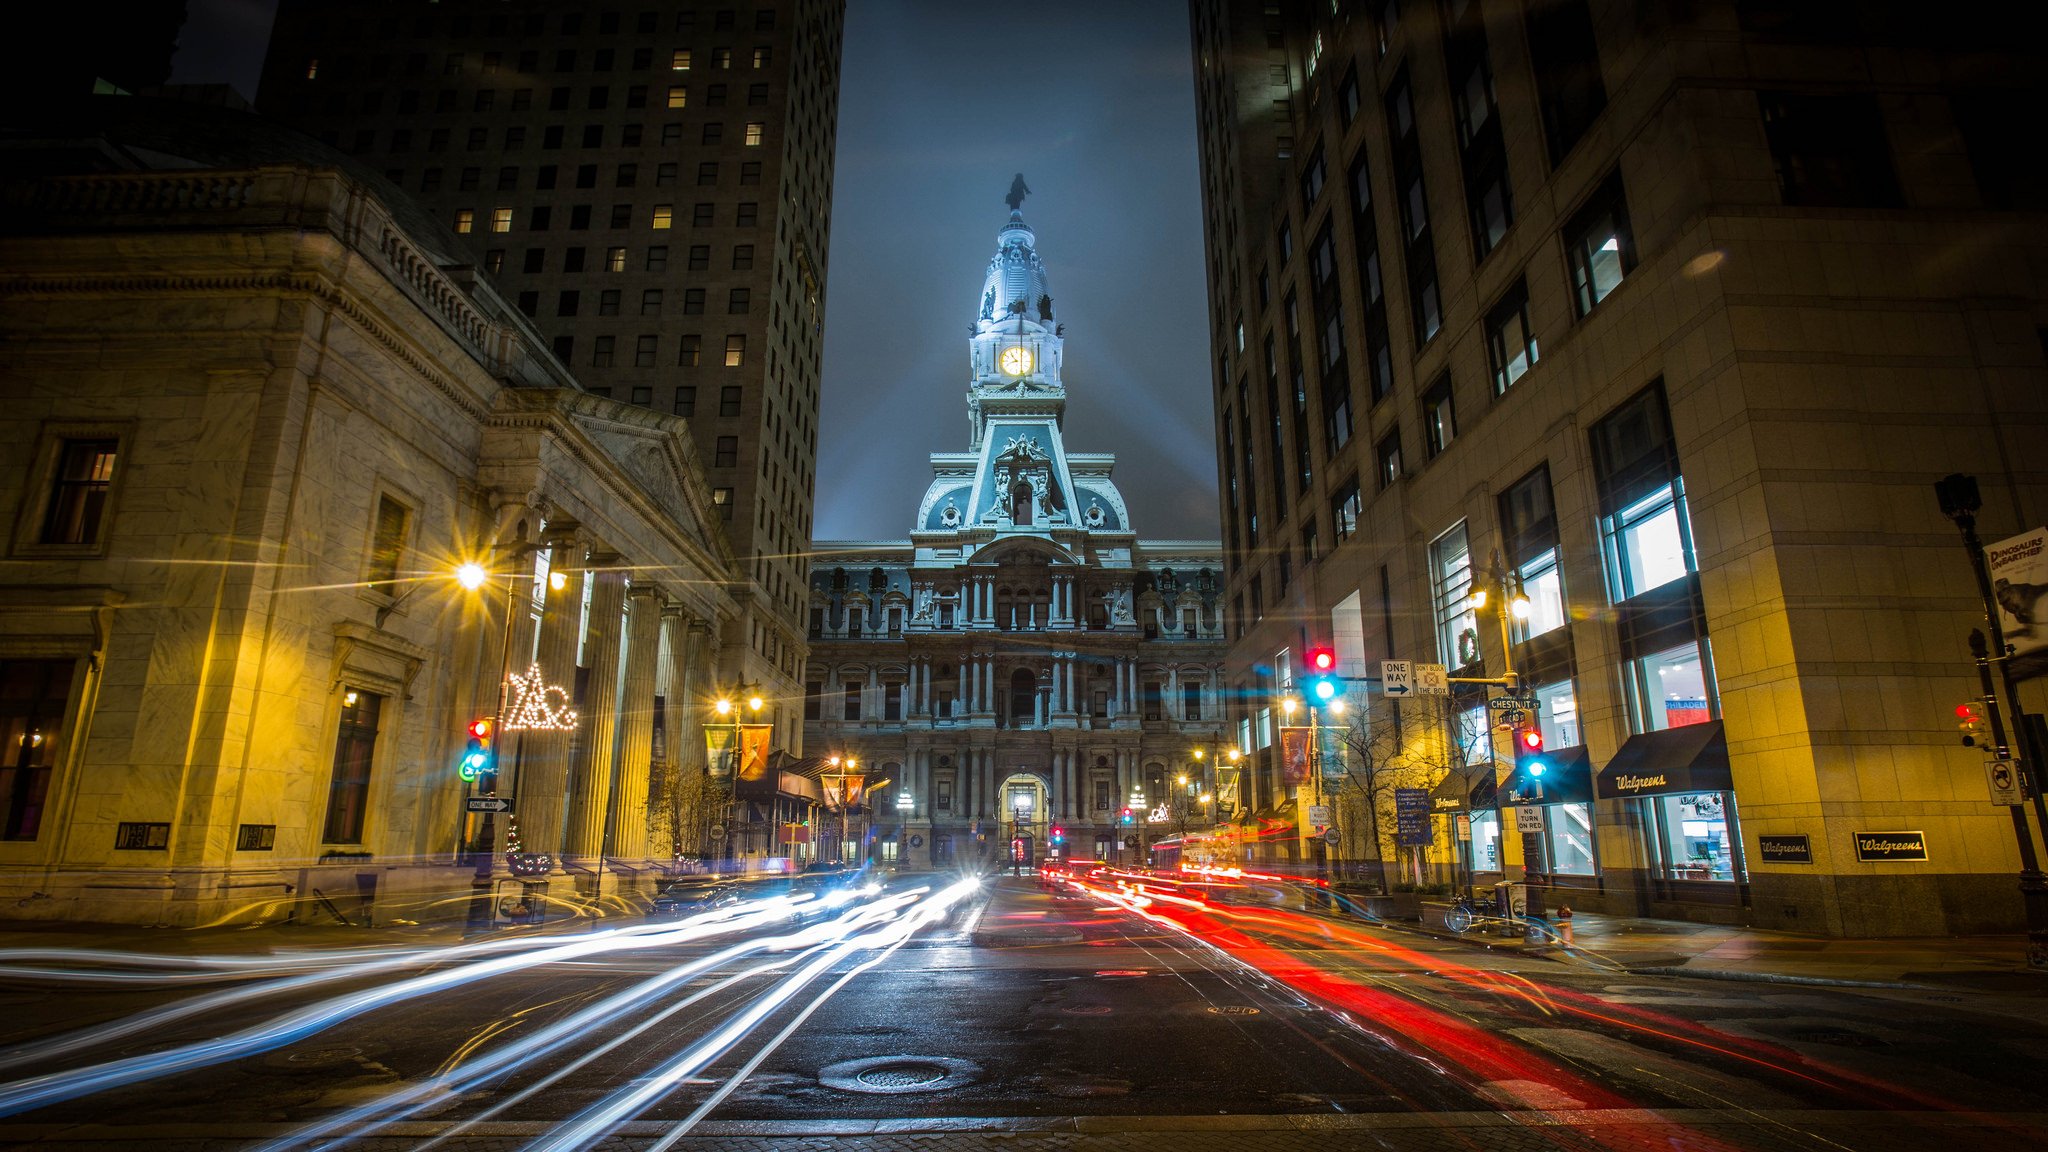 architecture, Bridges, Buildings, Cities, City, Downtown, Philadelphia, Pennsylvania, Night, Offices, Storehouses, Stores, Texas, Towers, Usa, Keystone state Wallpaper